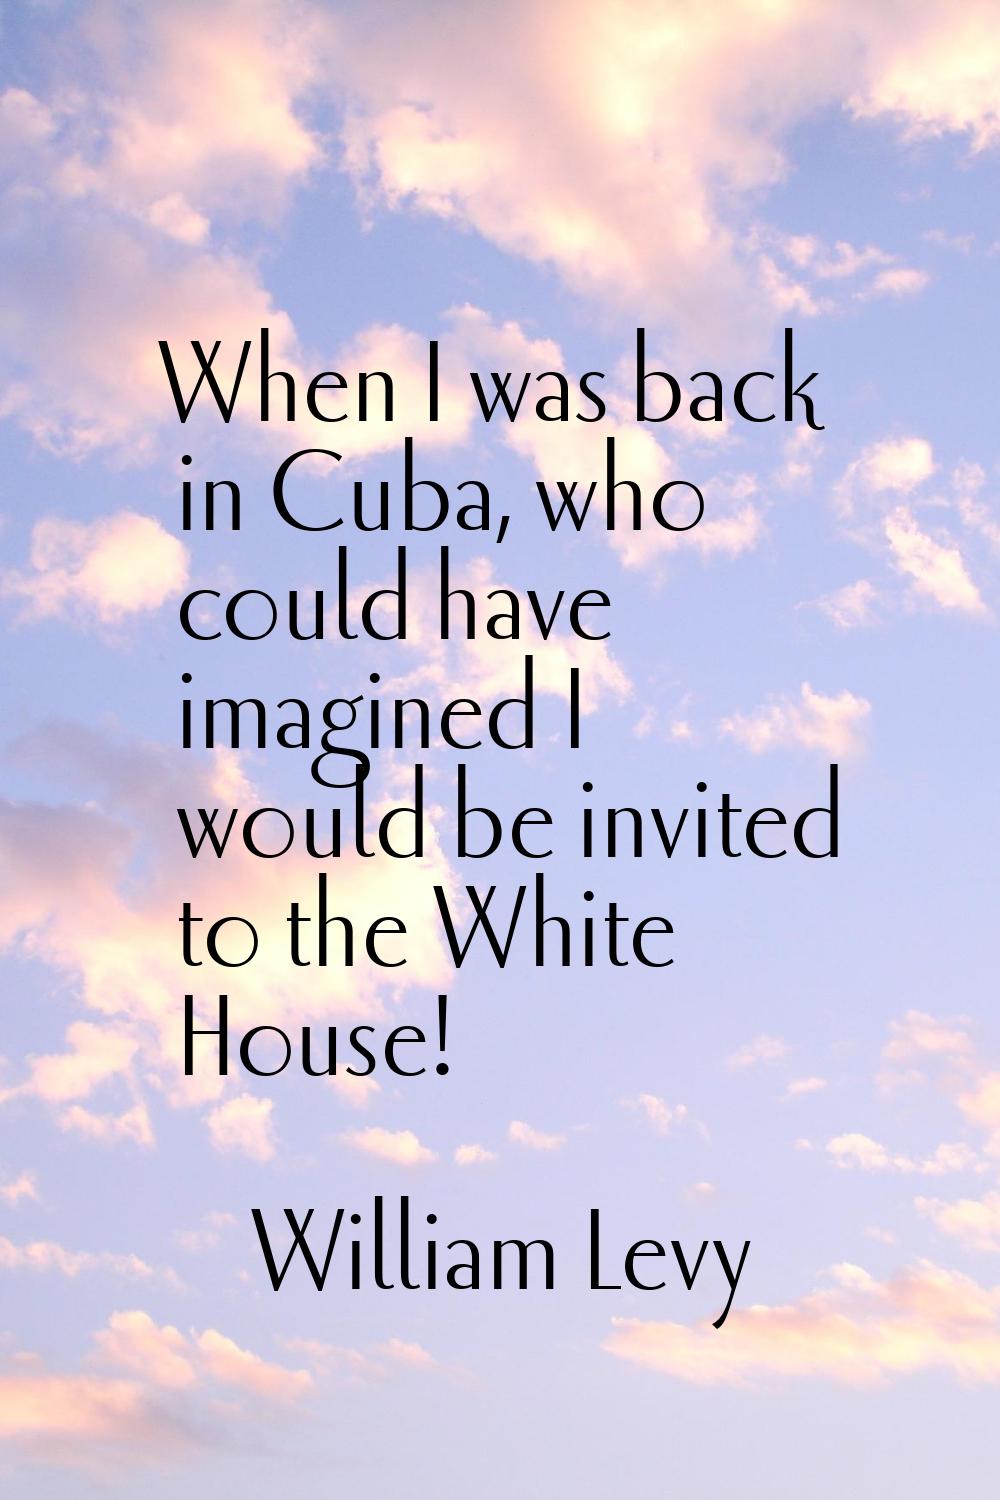 When I was back in Cuba, who could have imagined I would be invited to the White House!